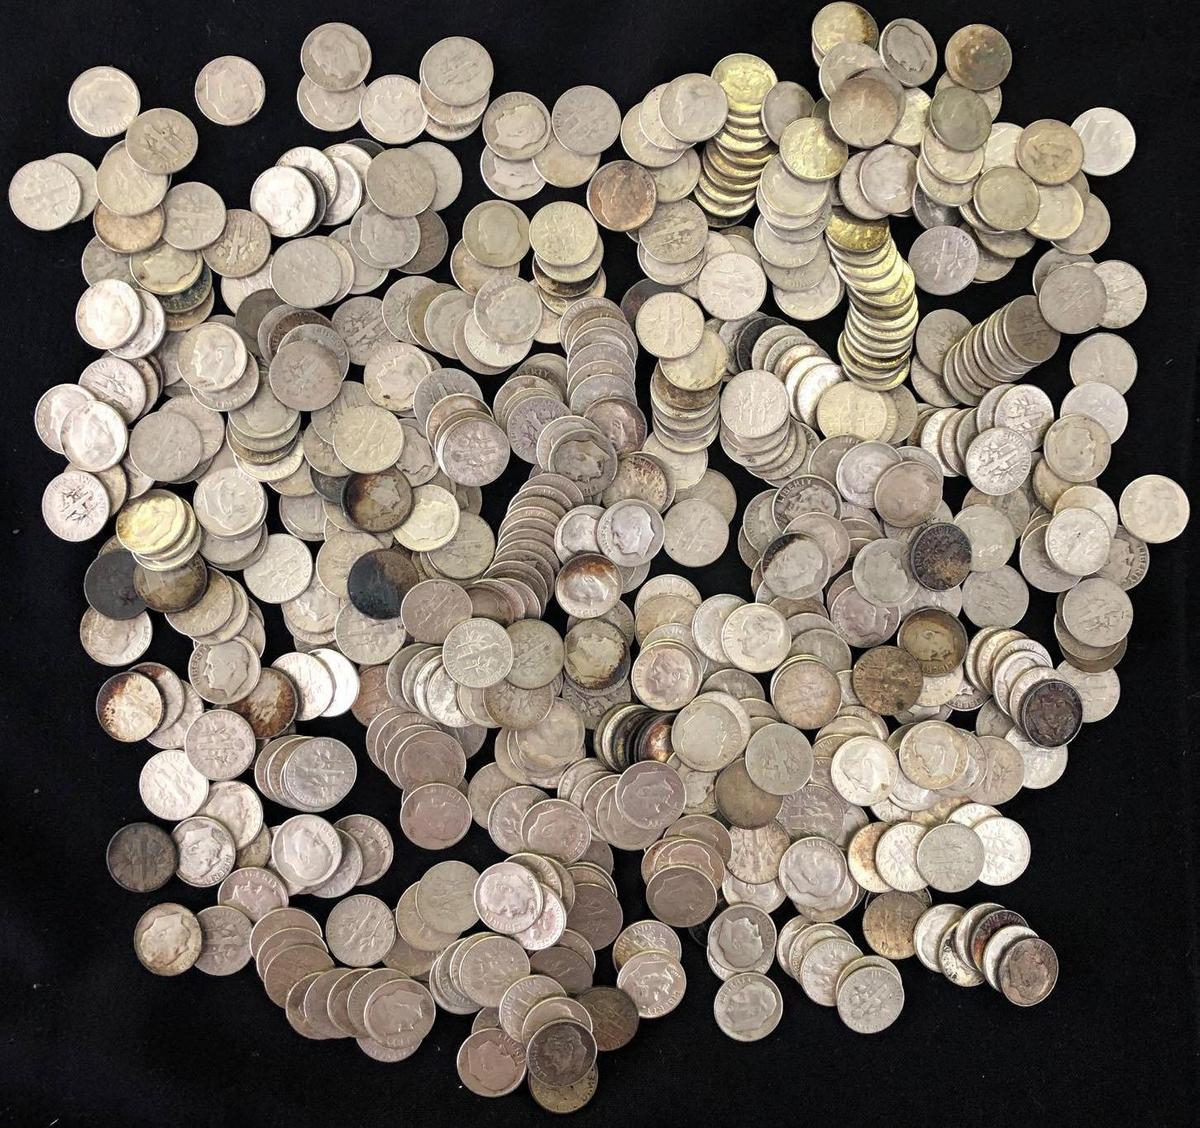 Approximately 570 Roosevelt Silver Dimes